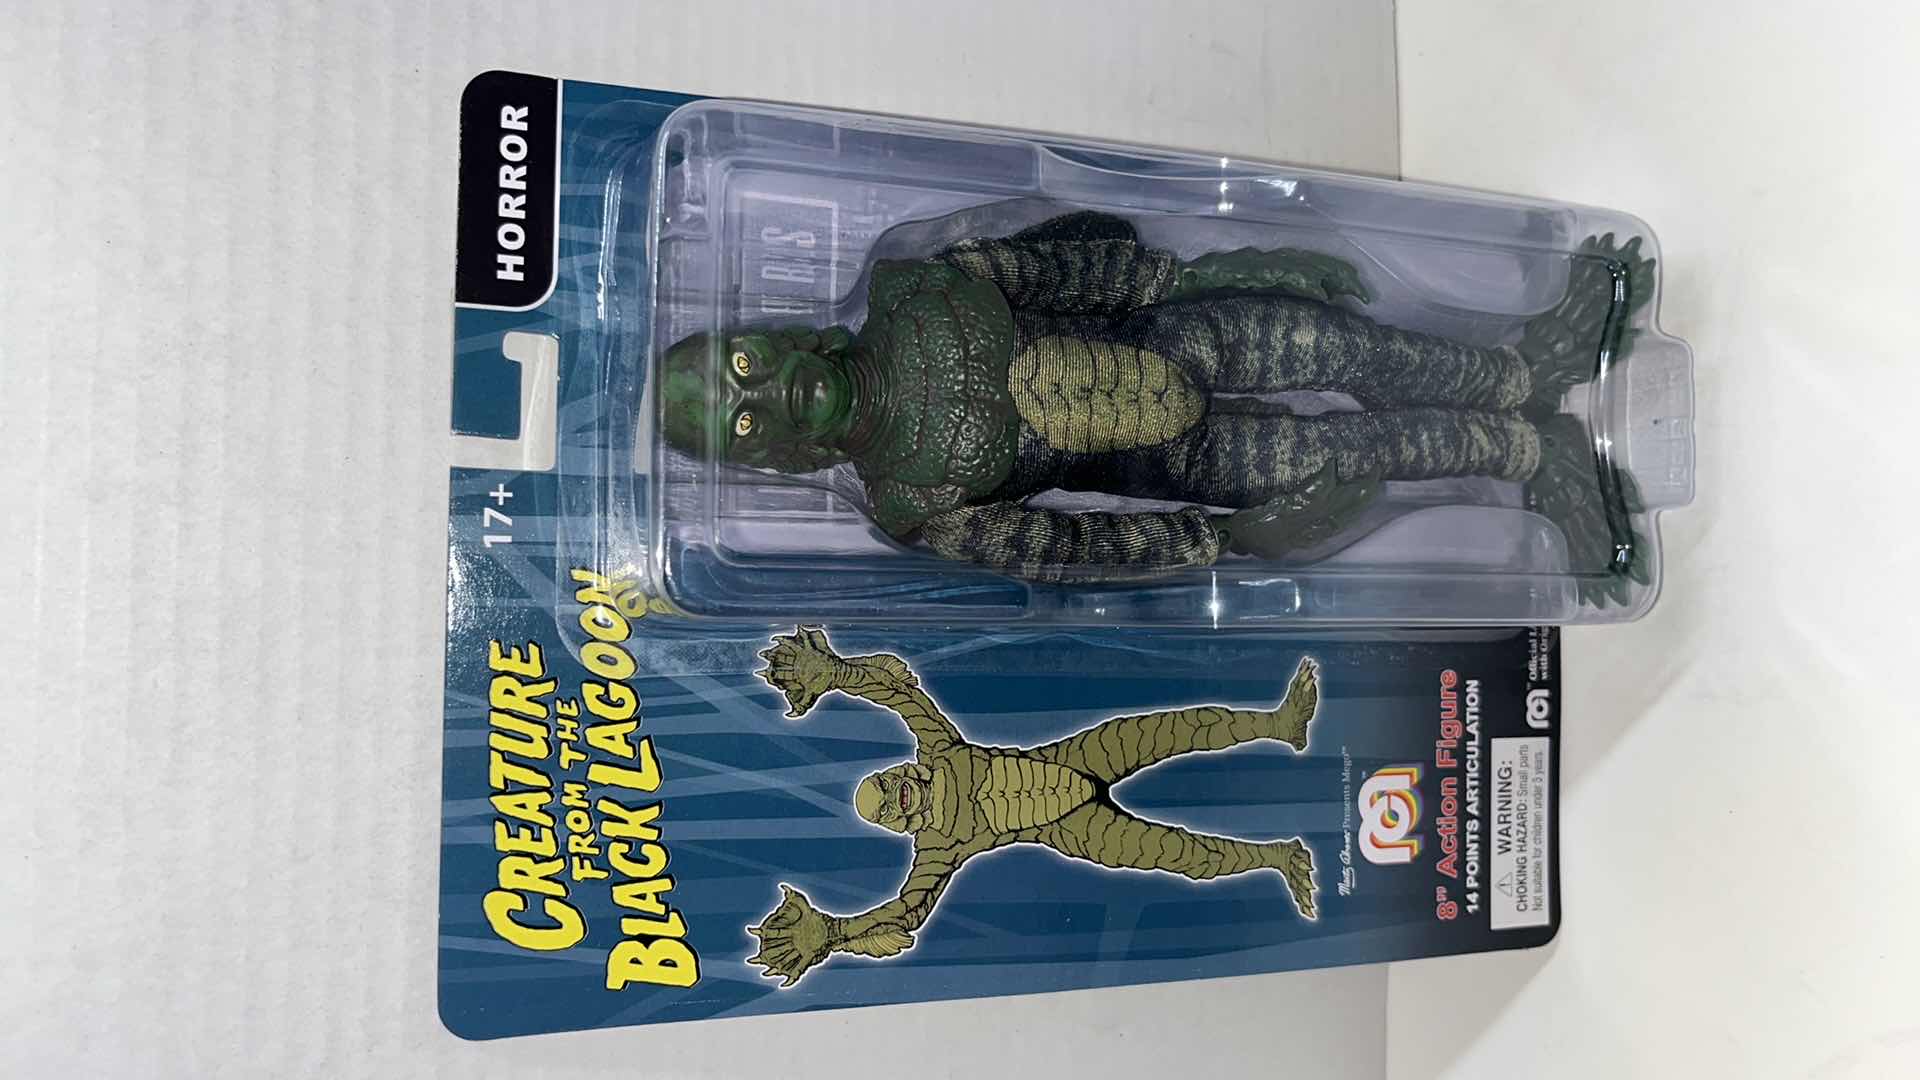 Photo 2 of NIB WORLDS GREATEST MEGO MONSTERS 8” ACTION FIGURE, CREATURE FROM THE BLACK LAGOON & THE WOLF MAN (2)